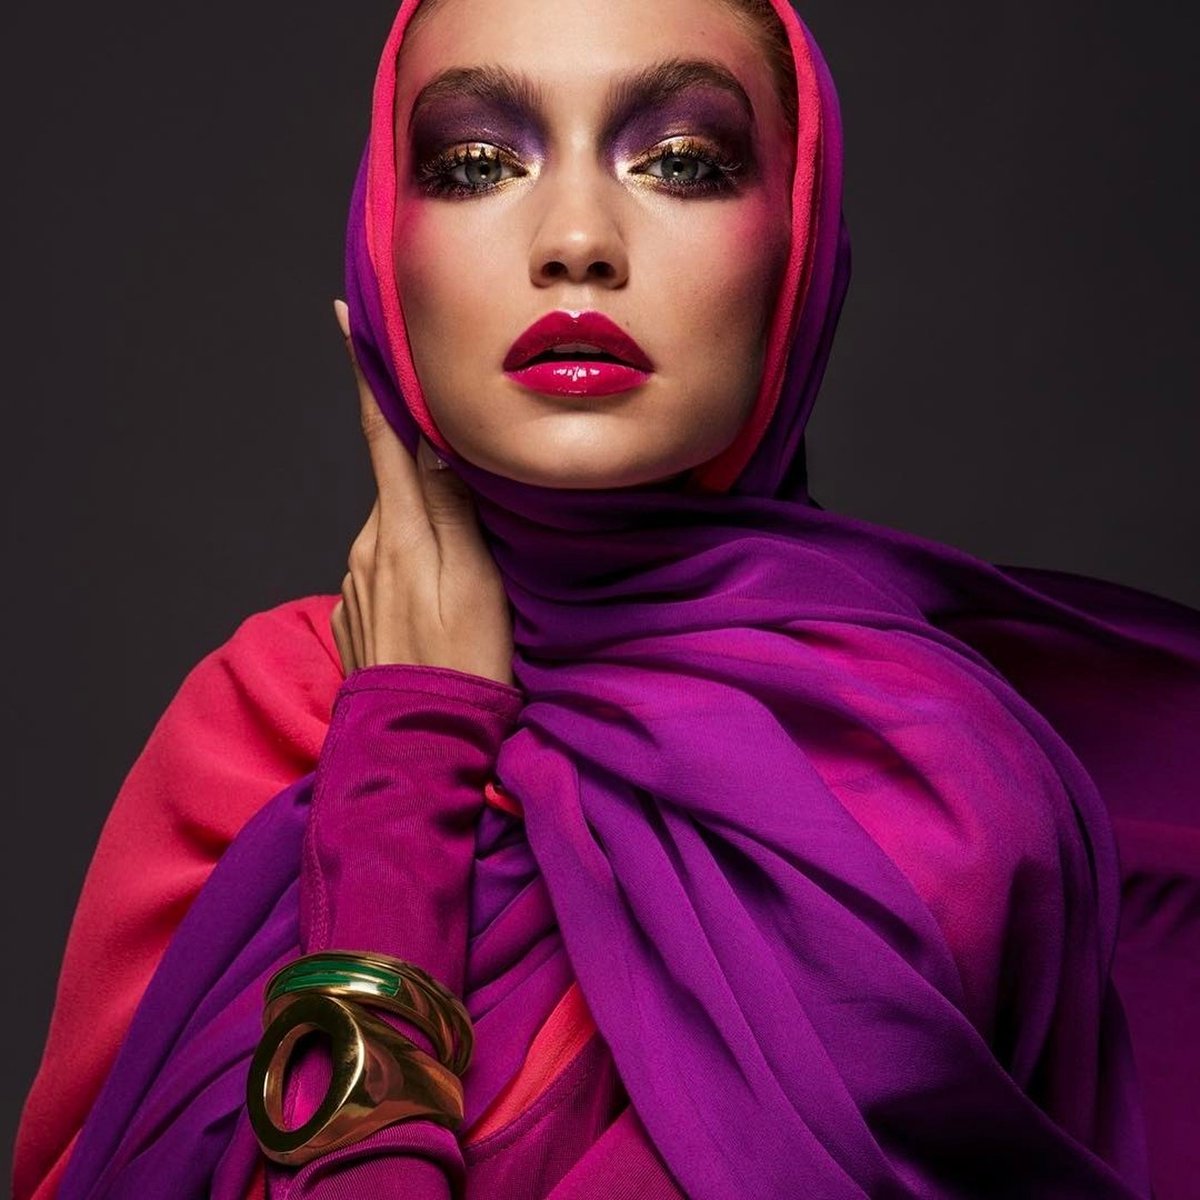 Then in 2017 she was on the front page of first print edition of Vogue Arabia and she wore this: